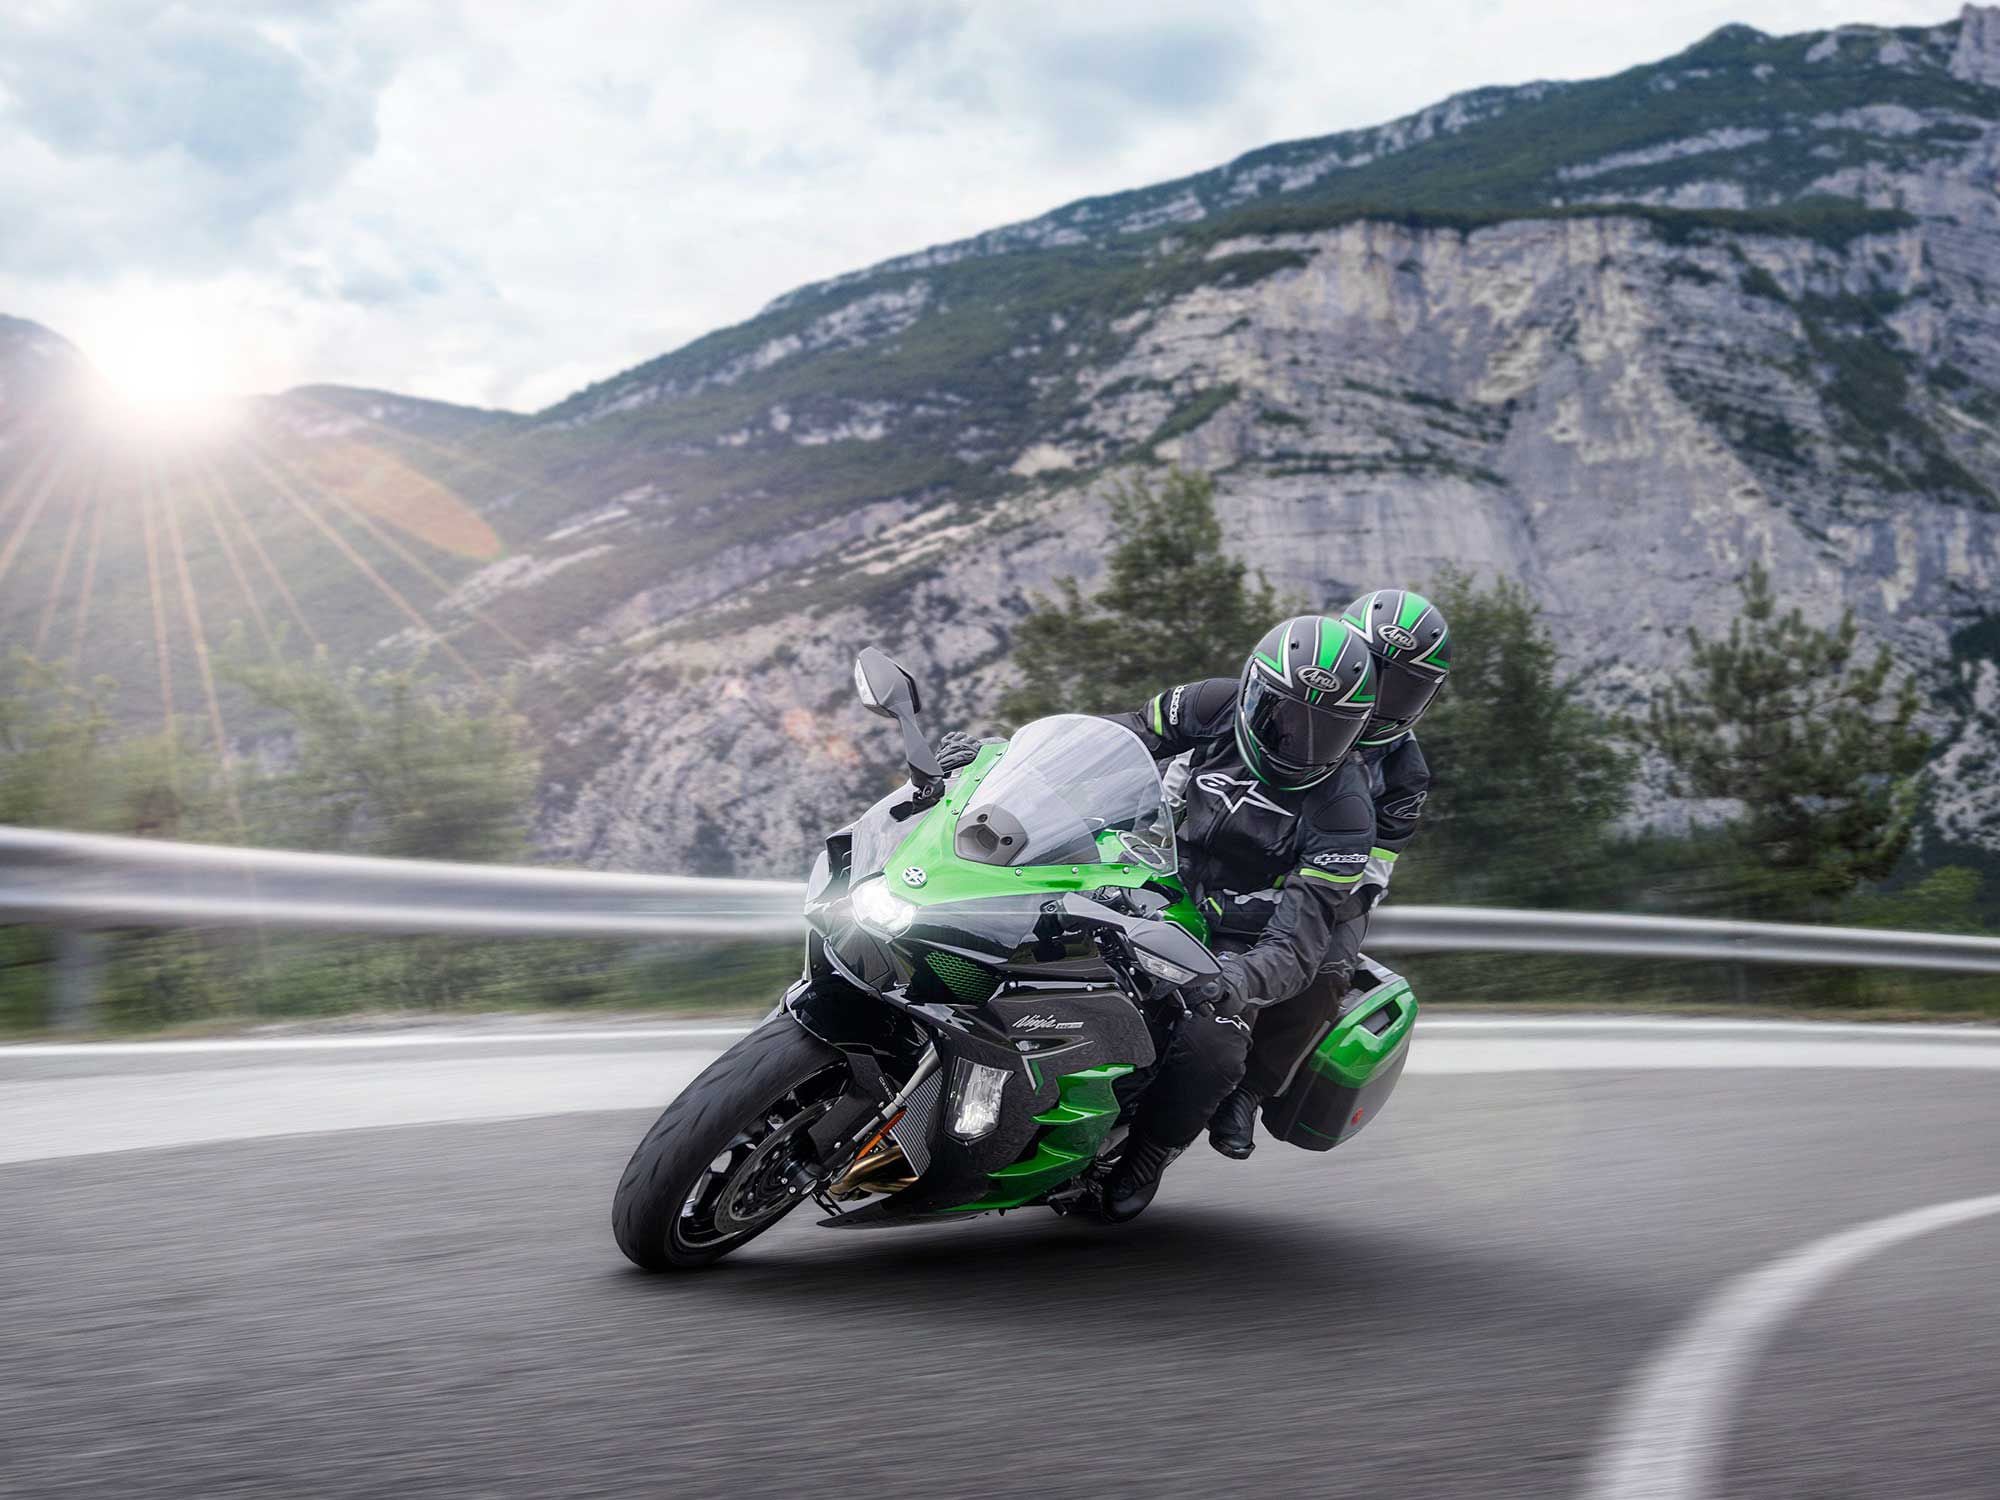 The 2023 Kawasaki Ninja H2 SX SE only gets a minor update for the coming model year.